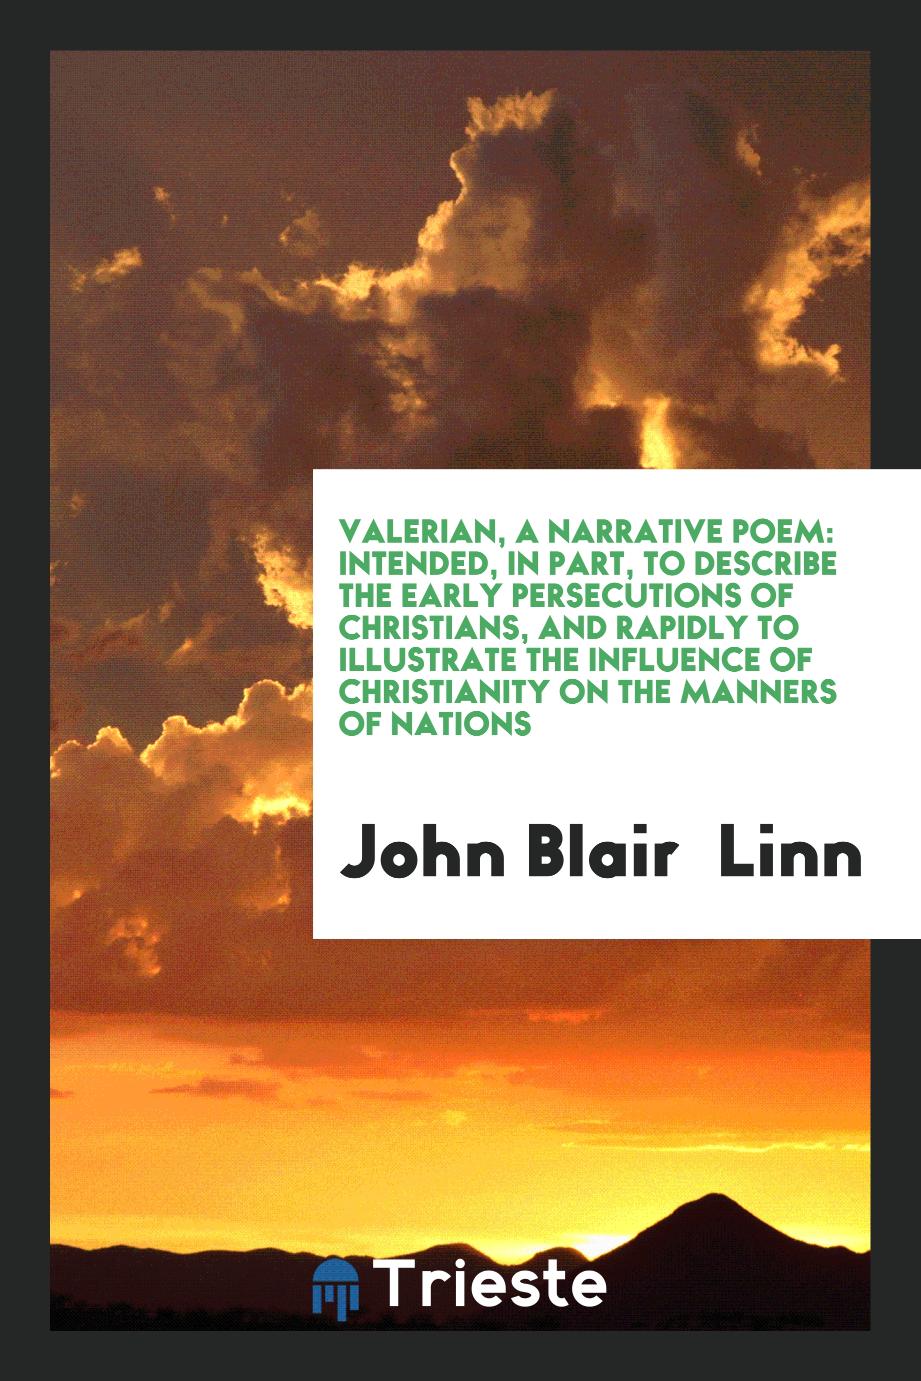 Valerian, A Narrative Poem: Intended, In Part, To Describe The Early Persecutions Of Christians, And Rapidly To Illustrate The Influence Of Christianity On The Manners Of Nations